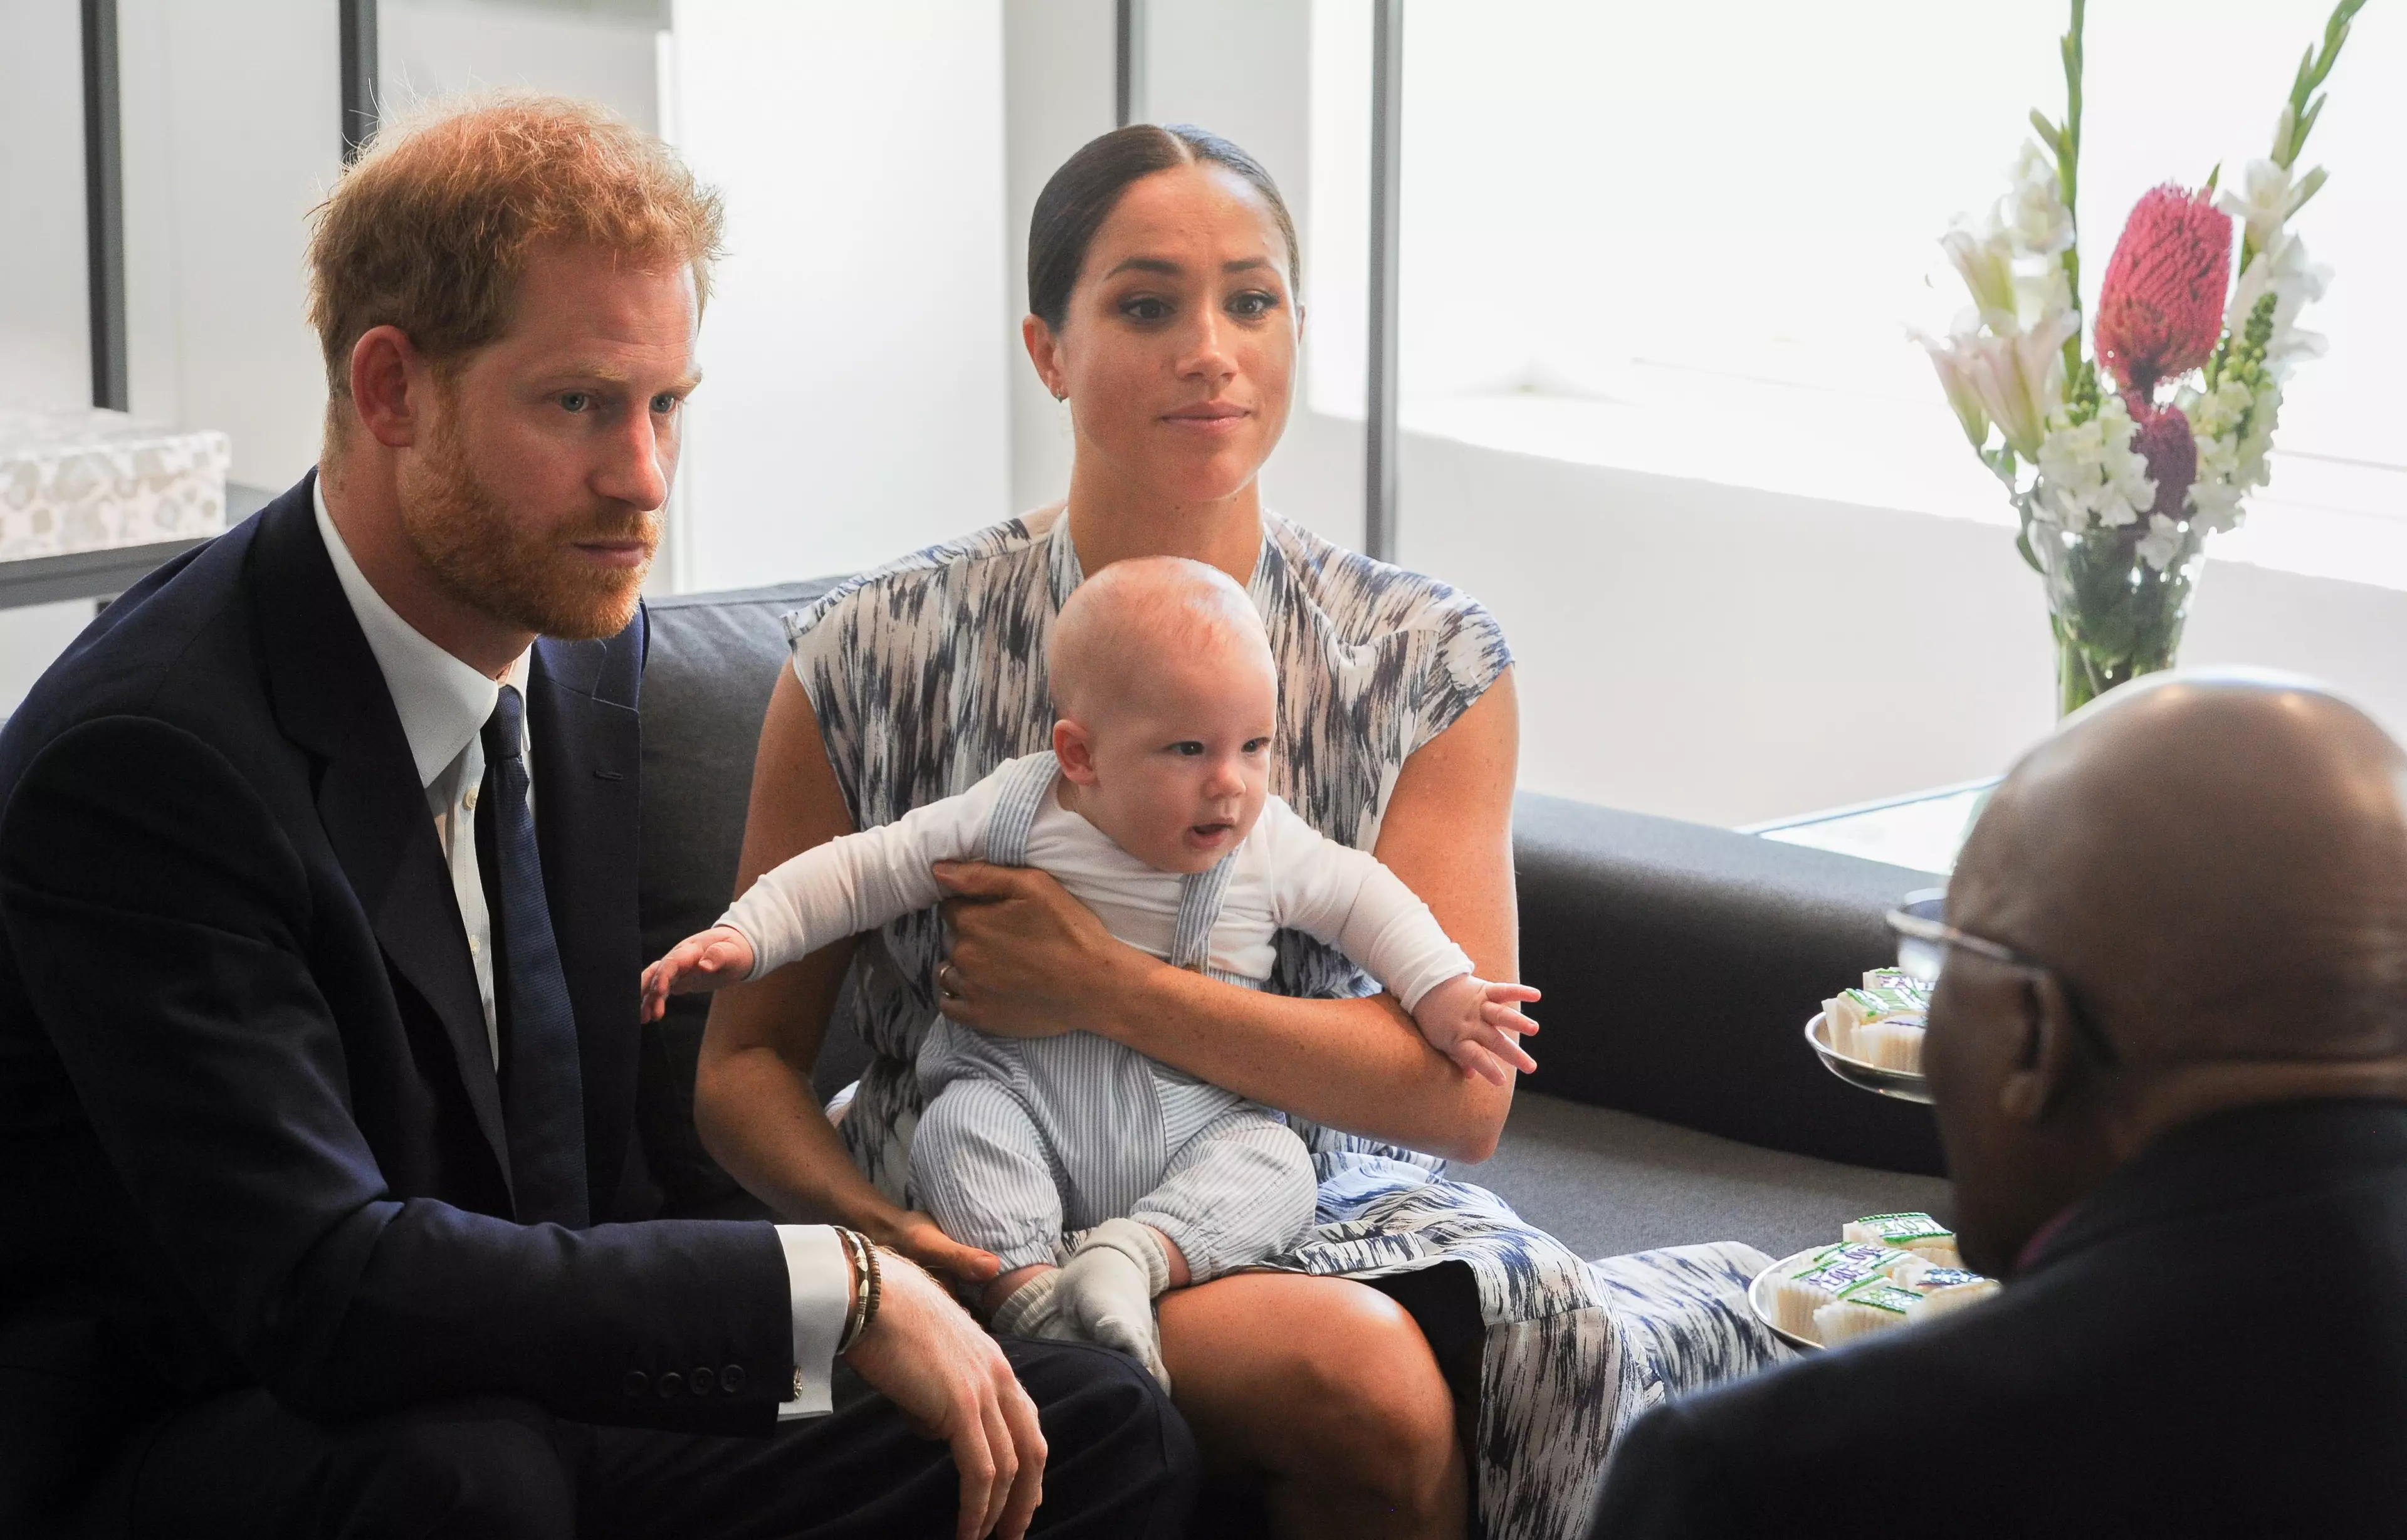 Meghan refused to rule out Archie's race as a reason for his lack of title (